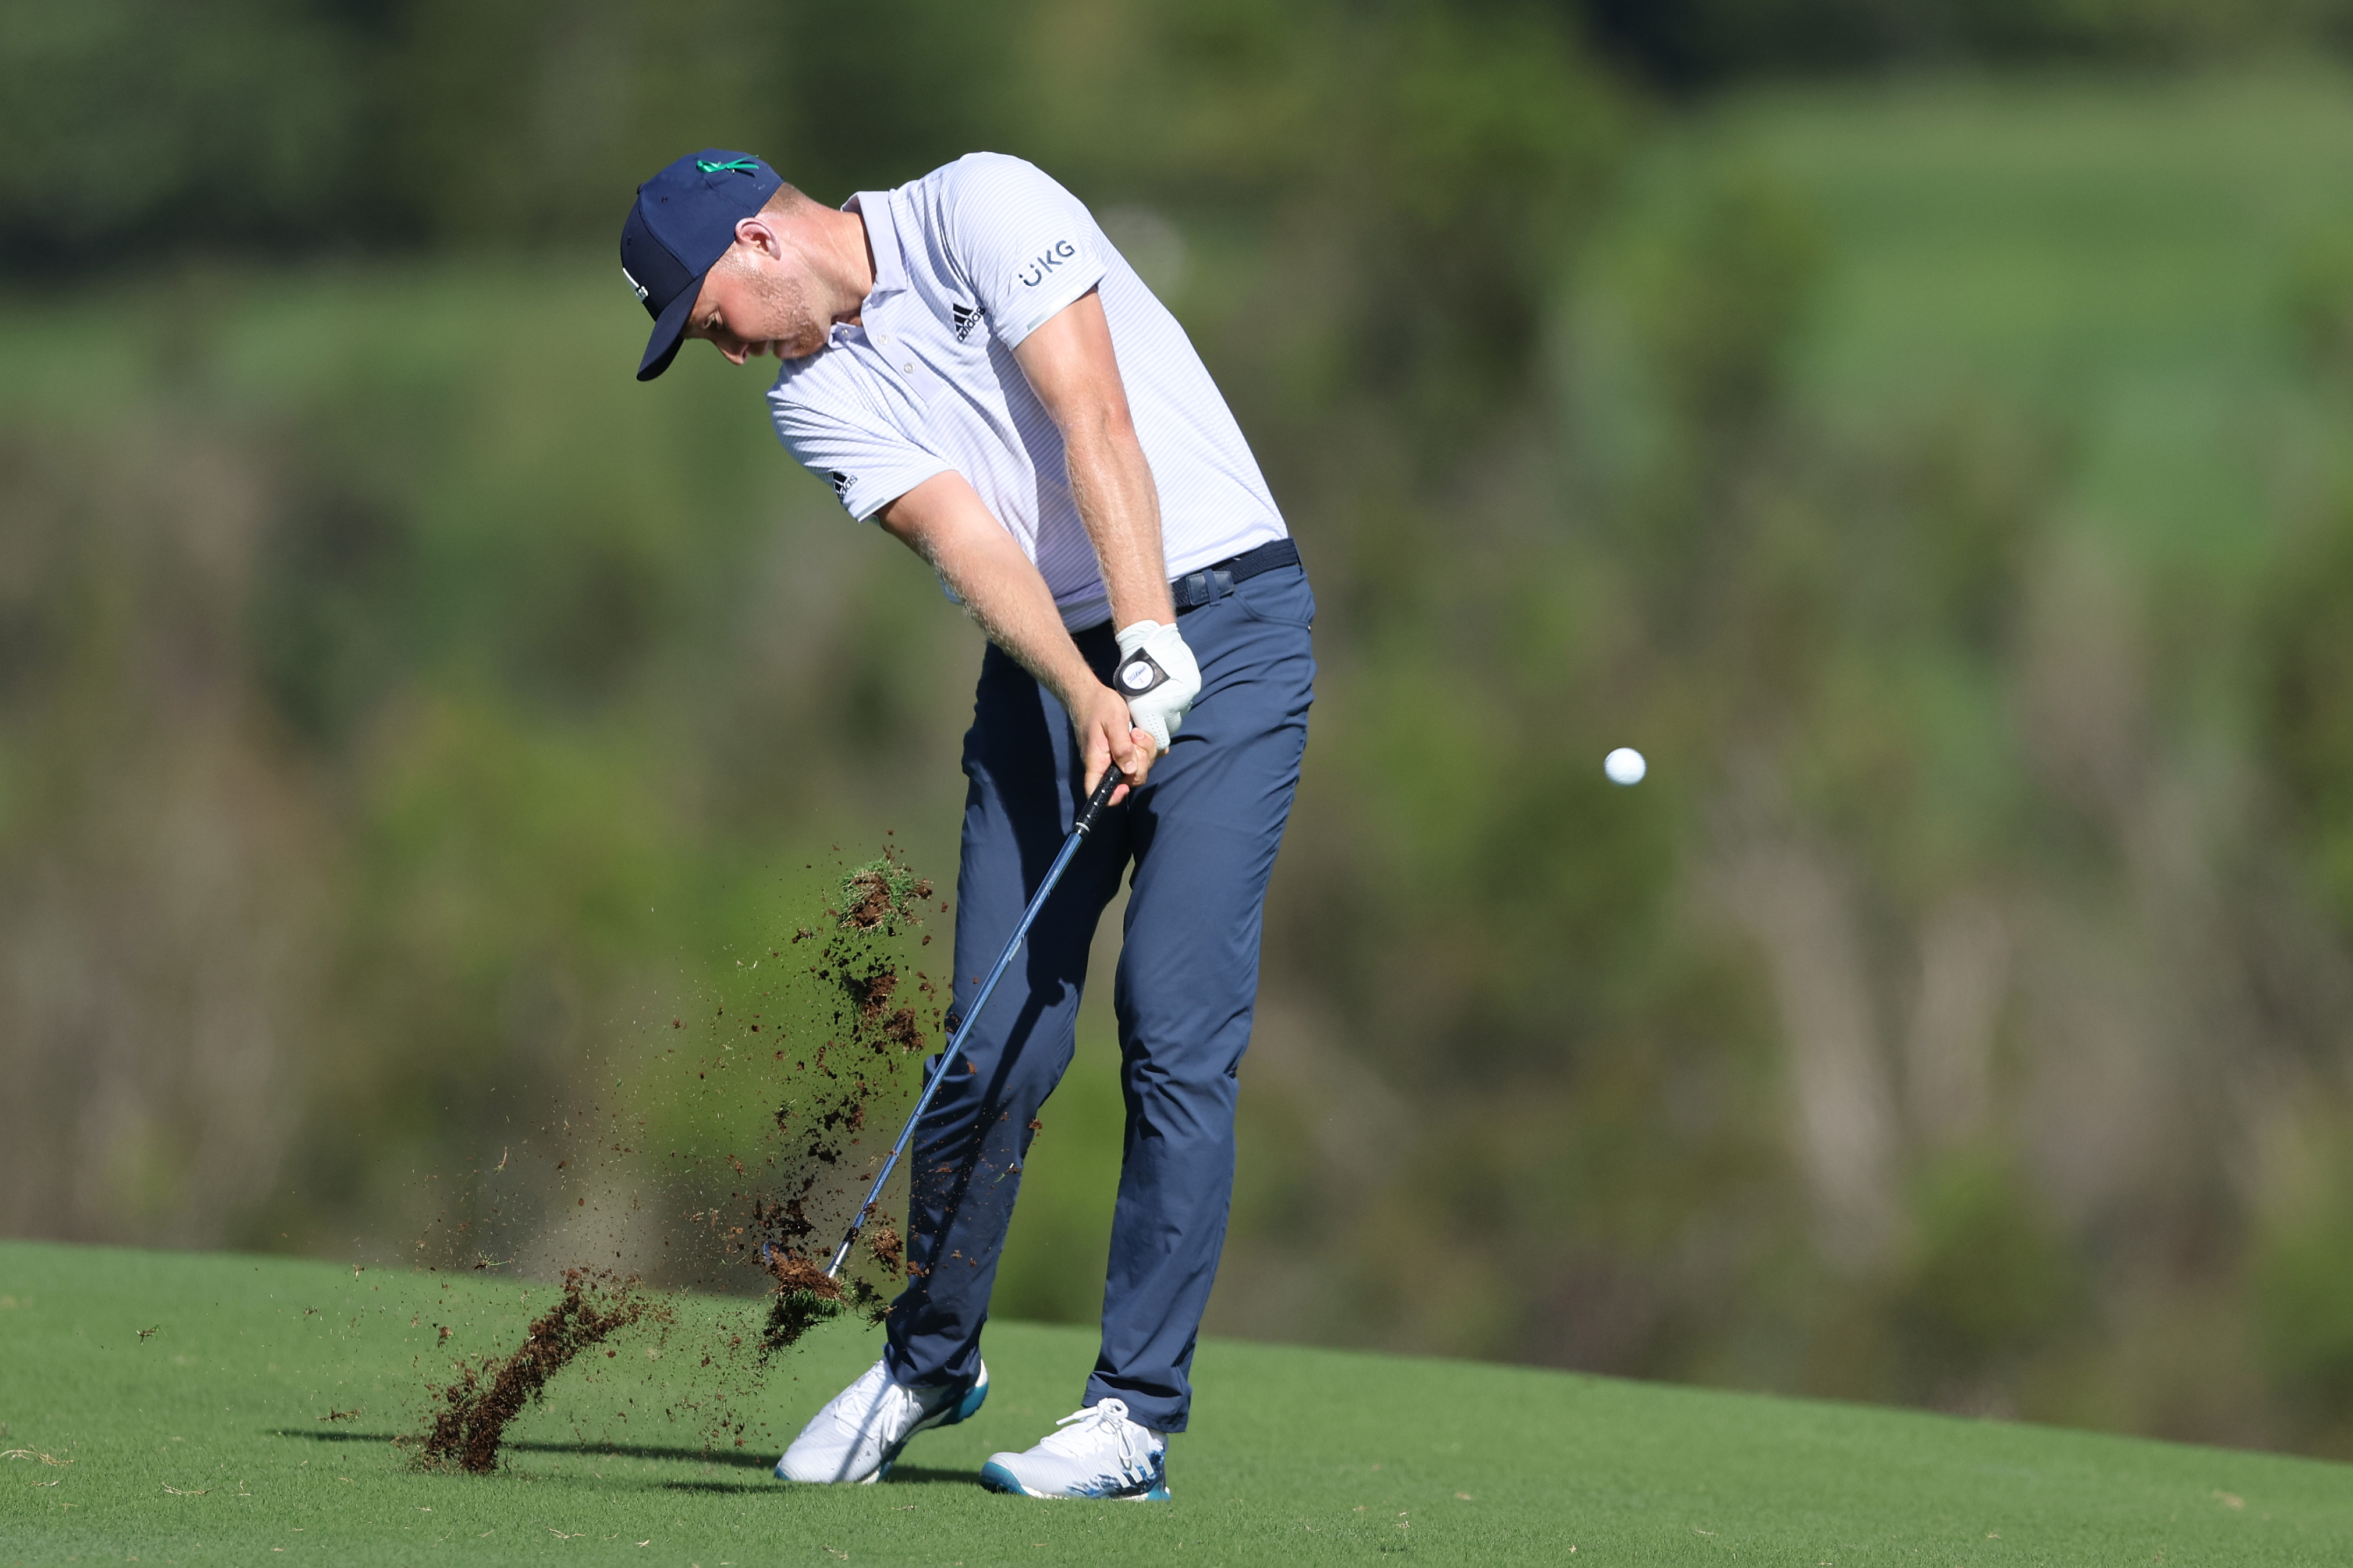 Daniel Berger of the United States plays an approach shot on the fourth hole during the first round of the Sentry Tournament of Champions at the Plantation Course at Kapalua Golf Club on January 06, 2022 in Lahaina, Hawaii.